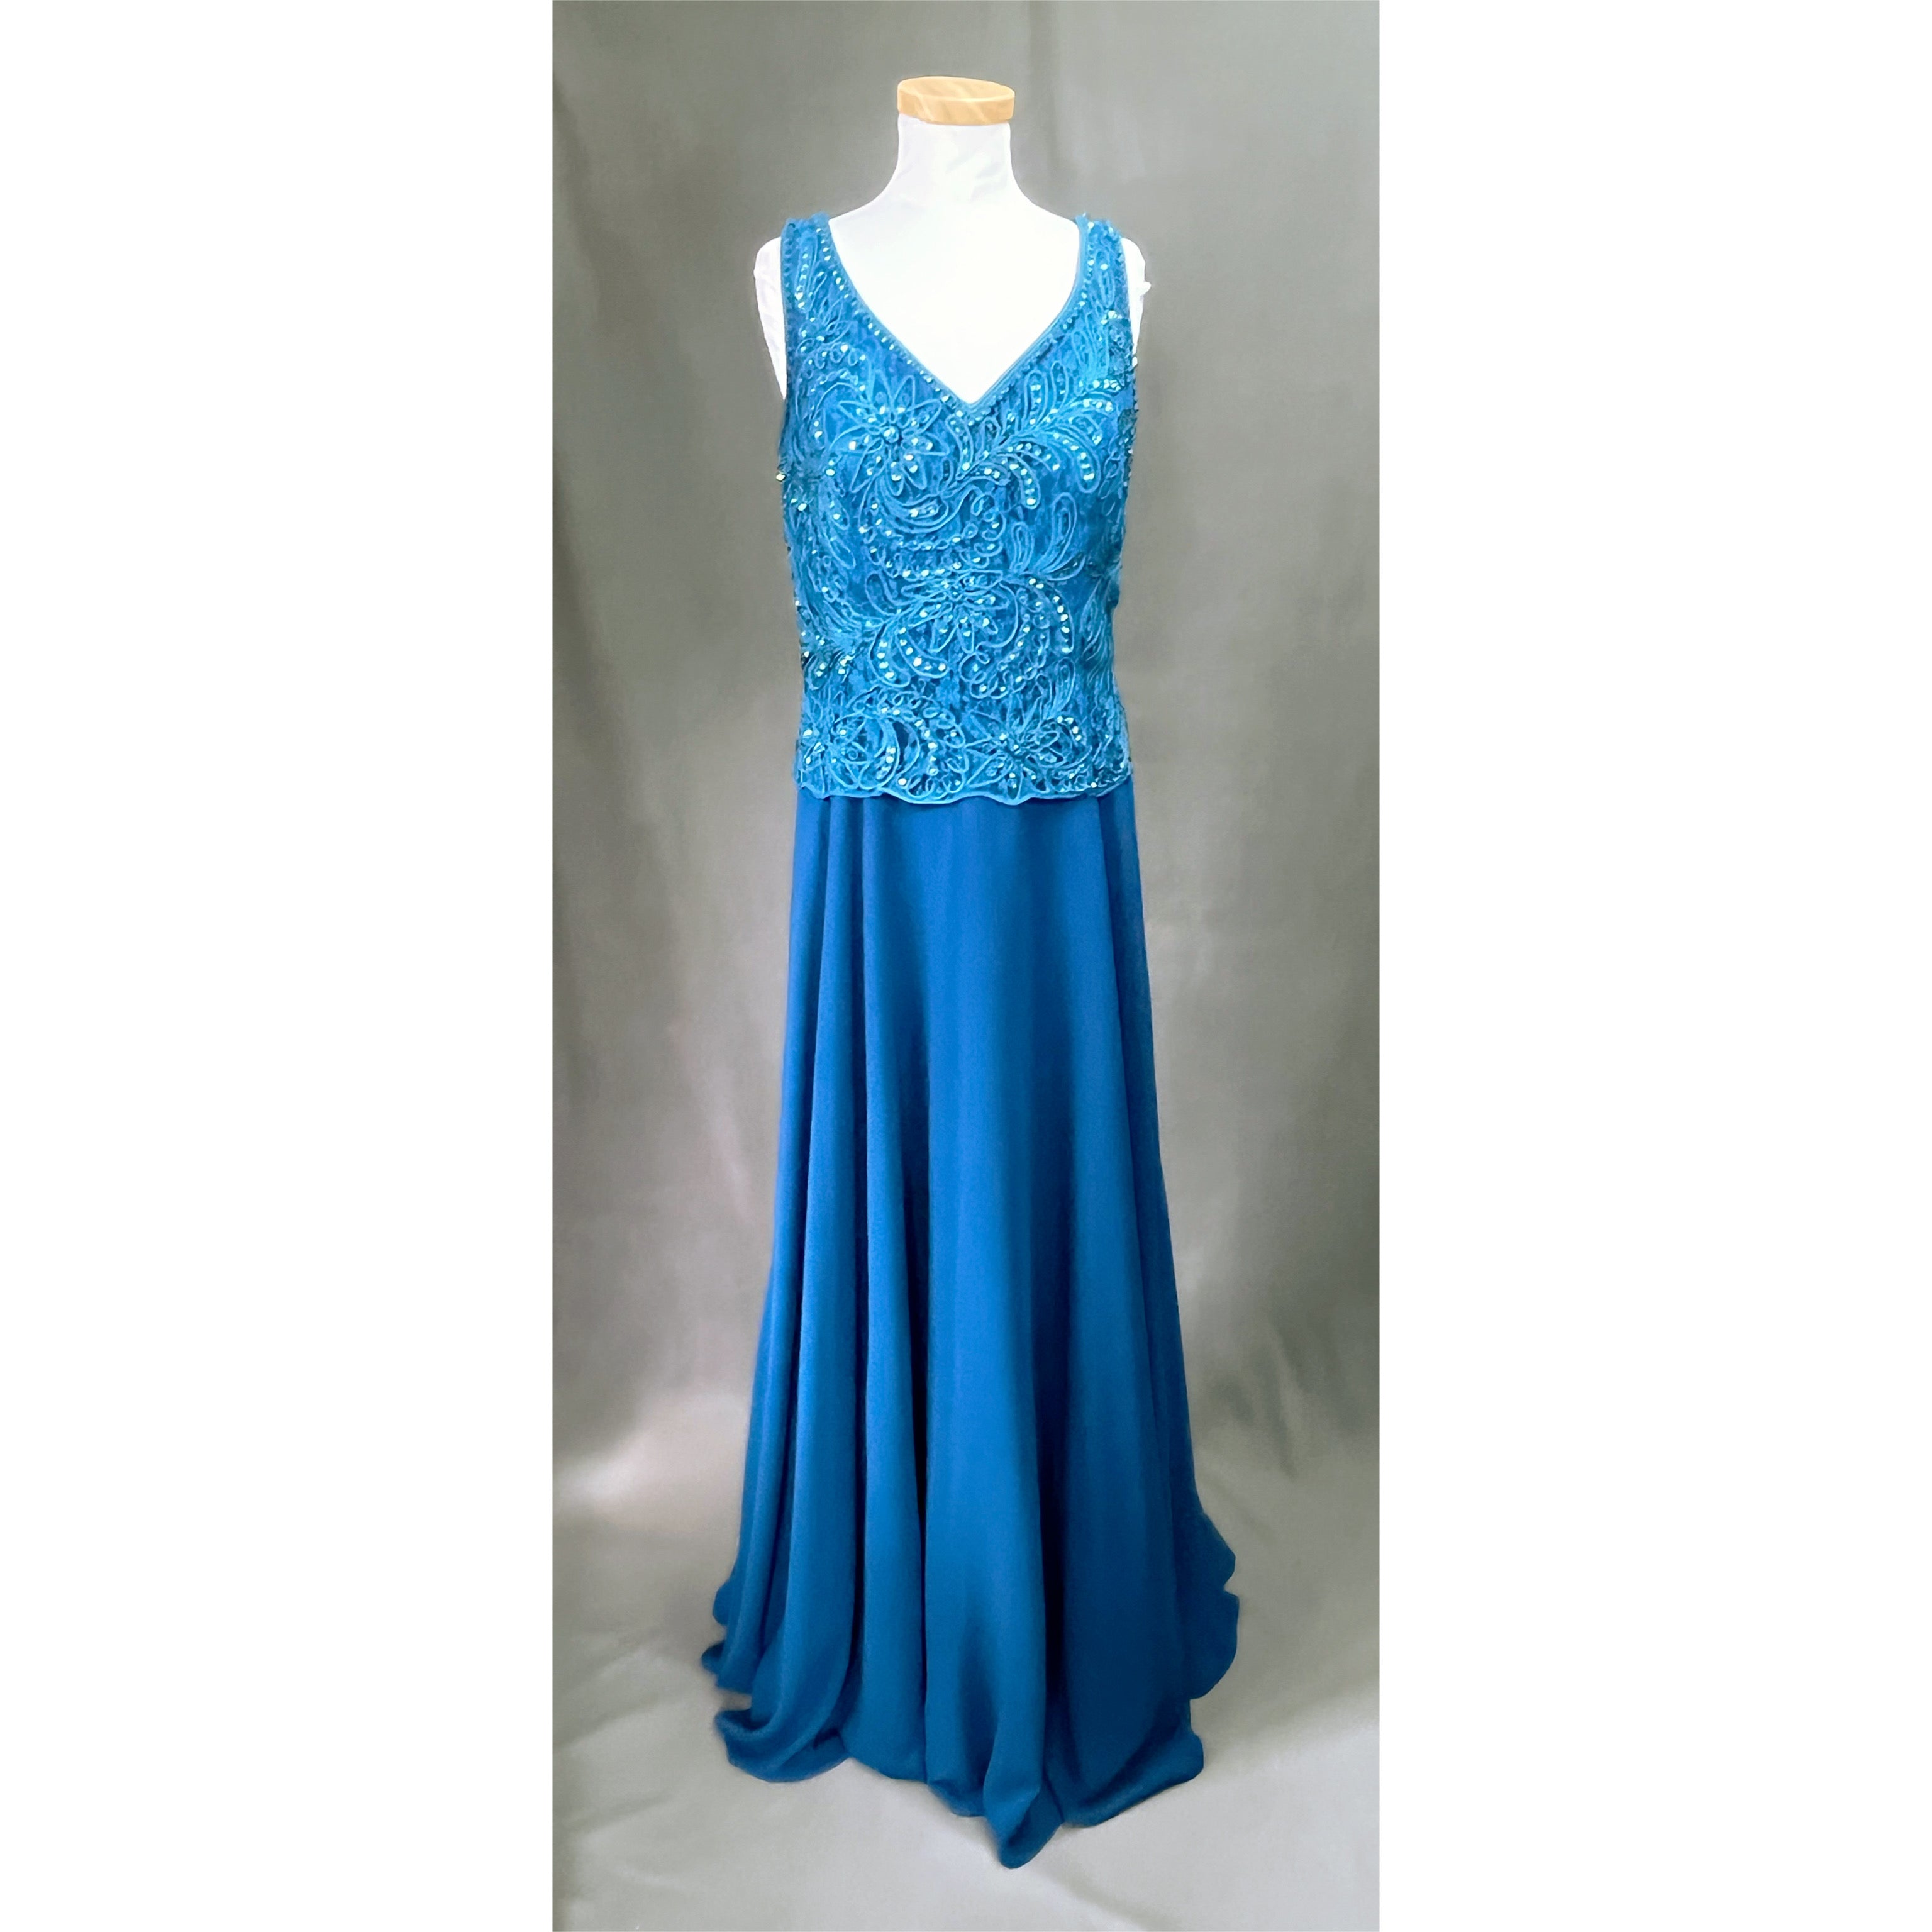 Cameron Blake Prussian blue dress, size 14, NEW WITH TAGS!